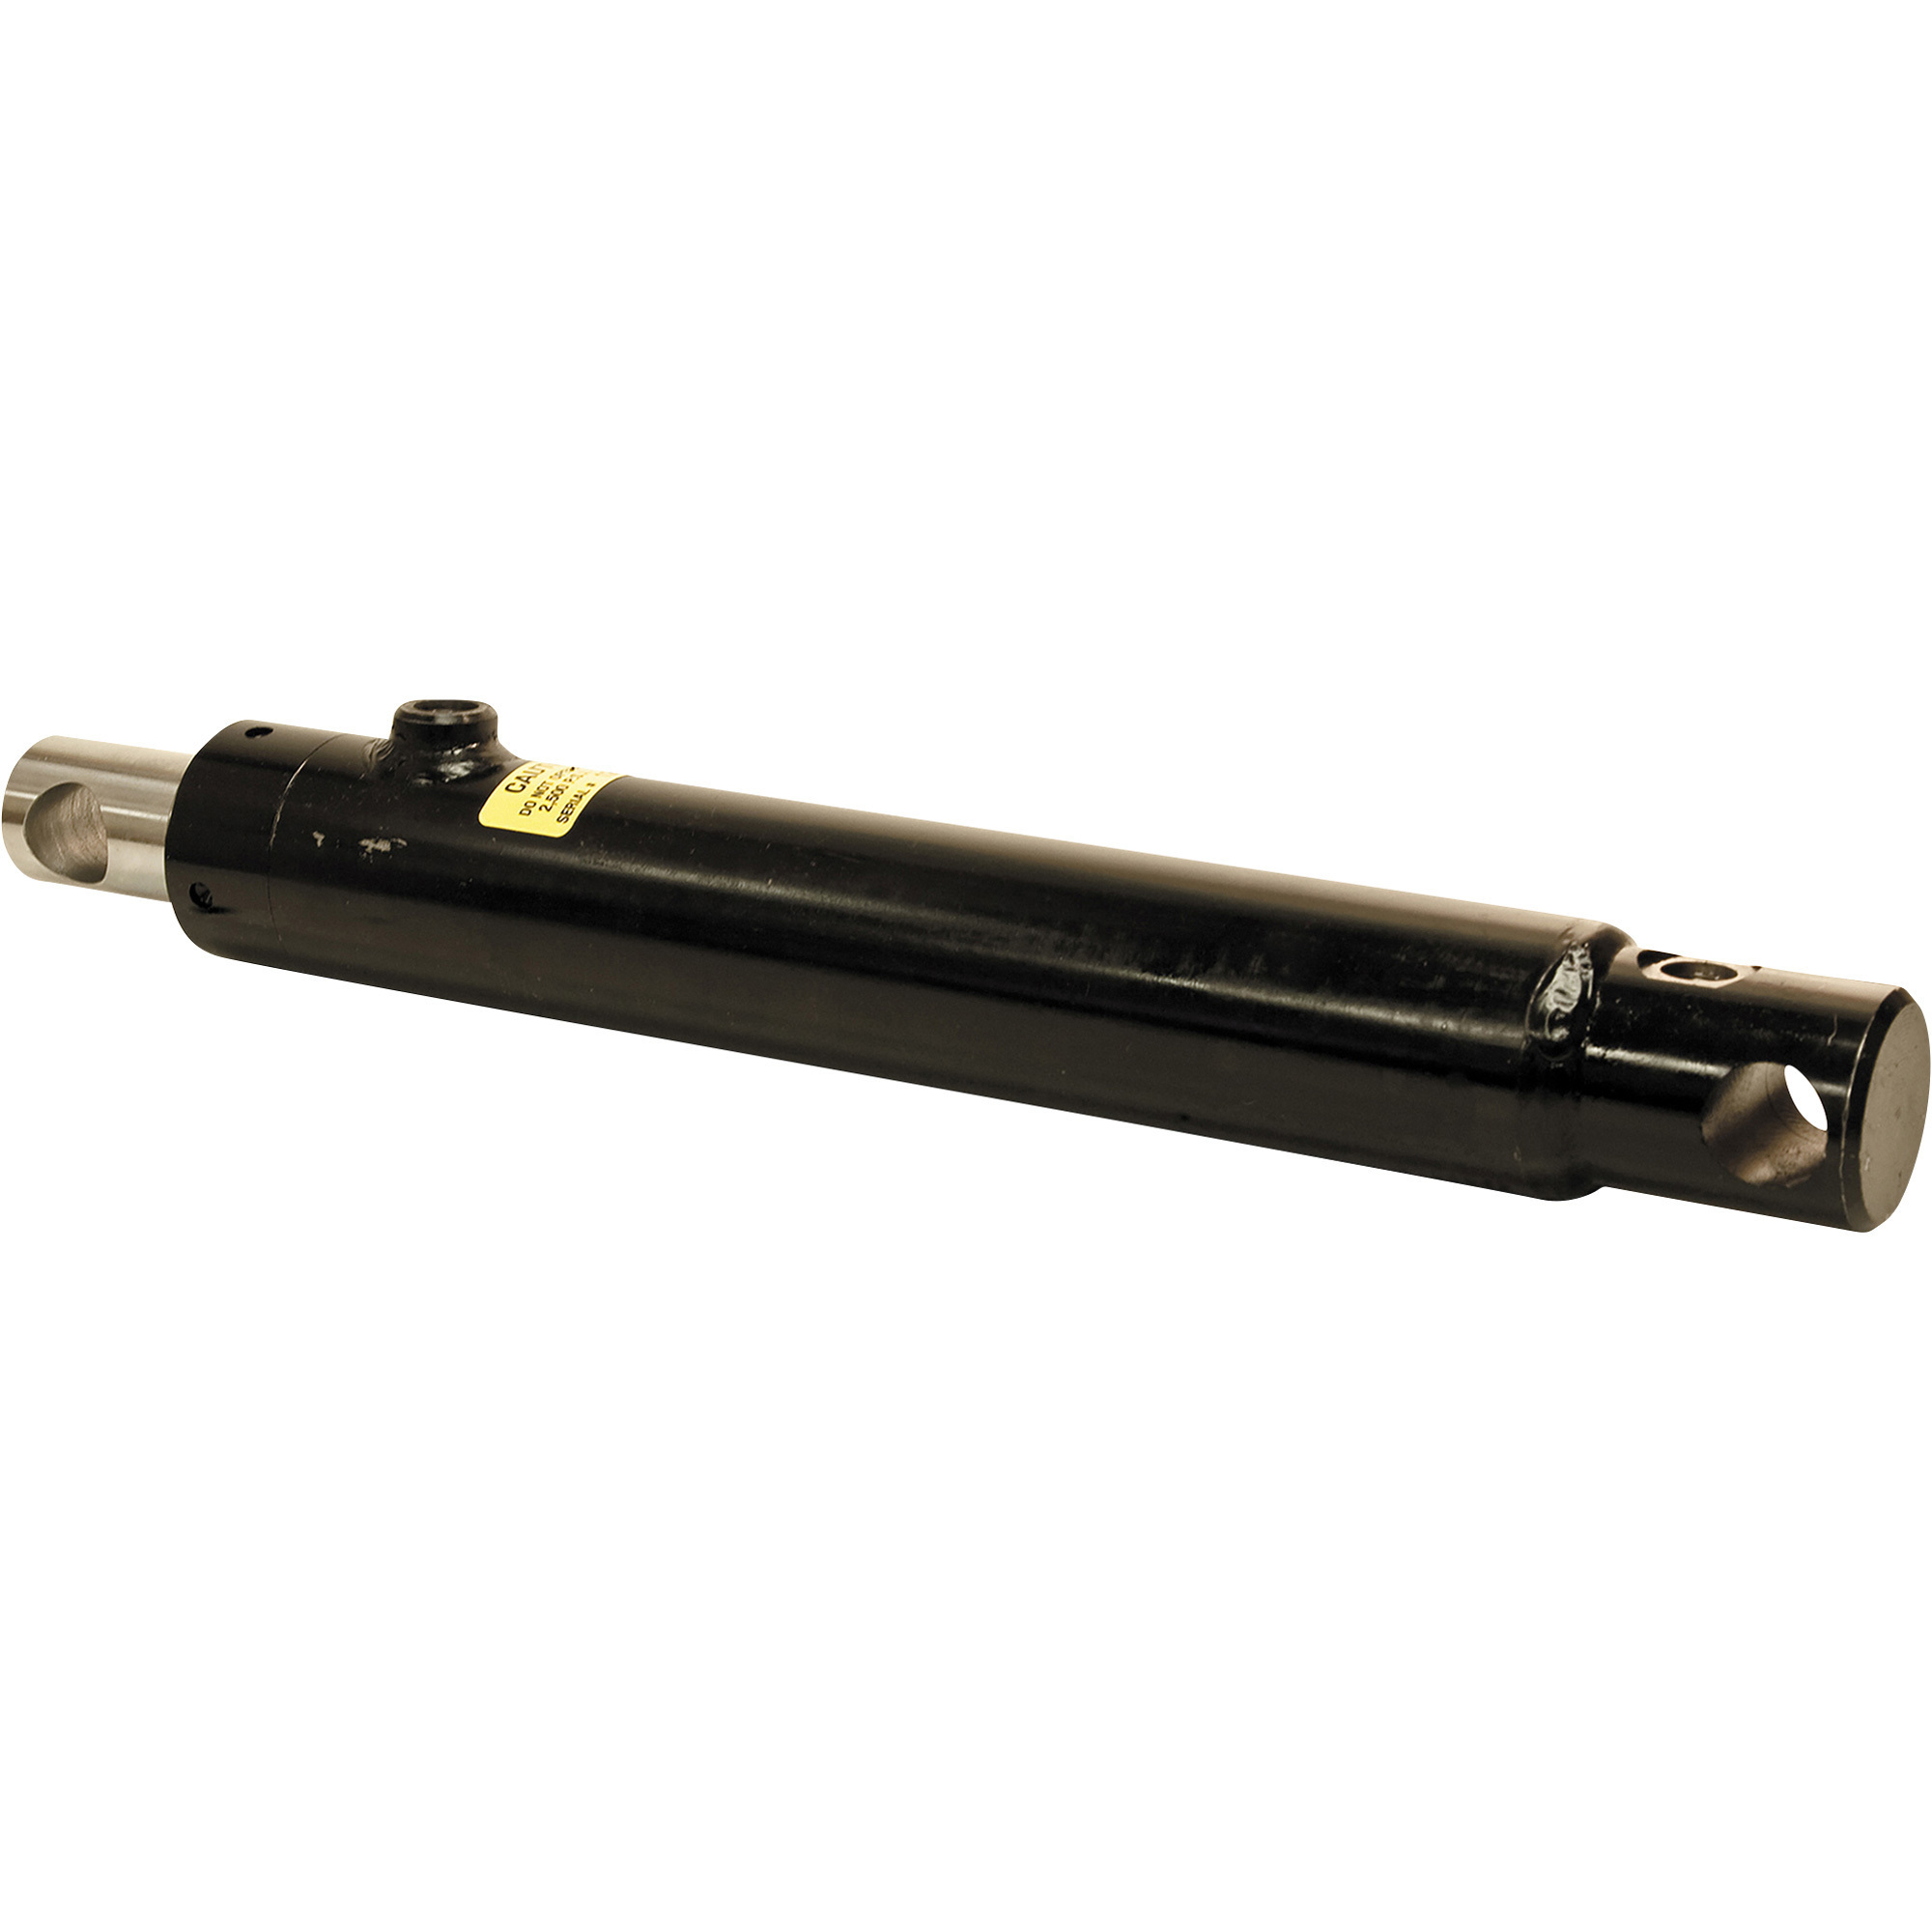 SAM Single Acting Hydraulic Cylinders for Fisher Snow Plows, Replaces OEM Part# 6603K, Model 1304312